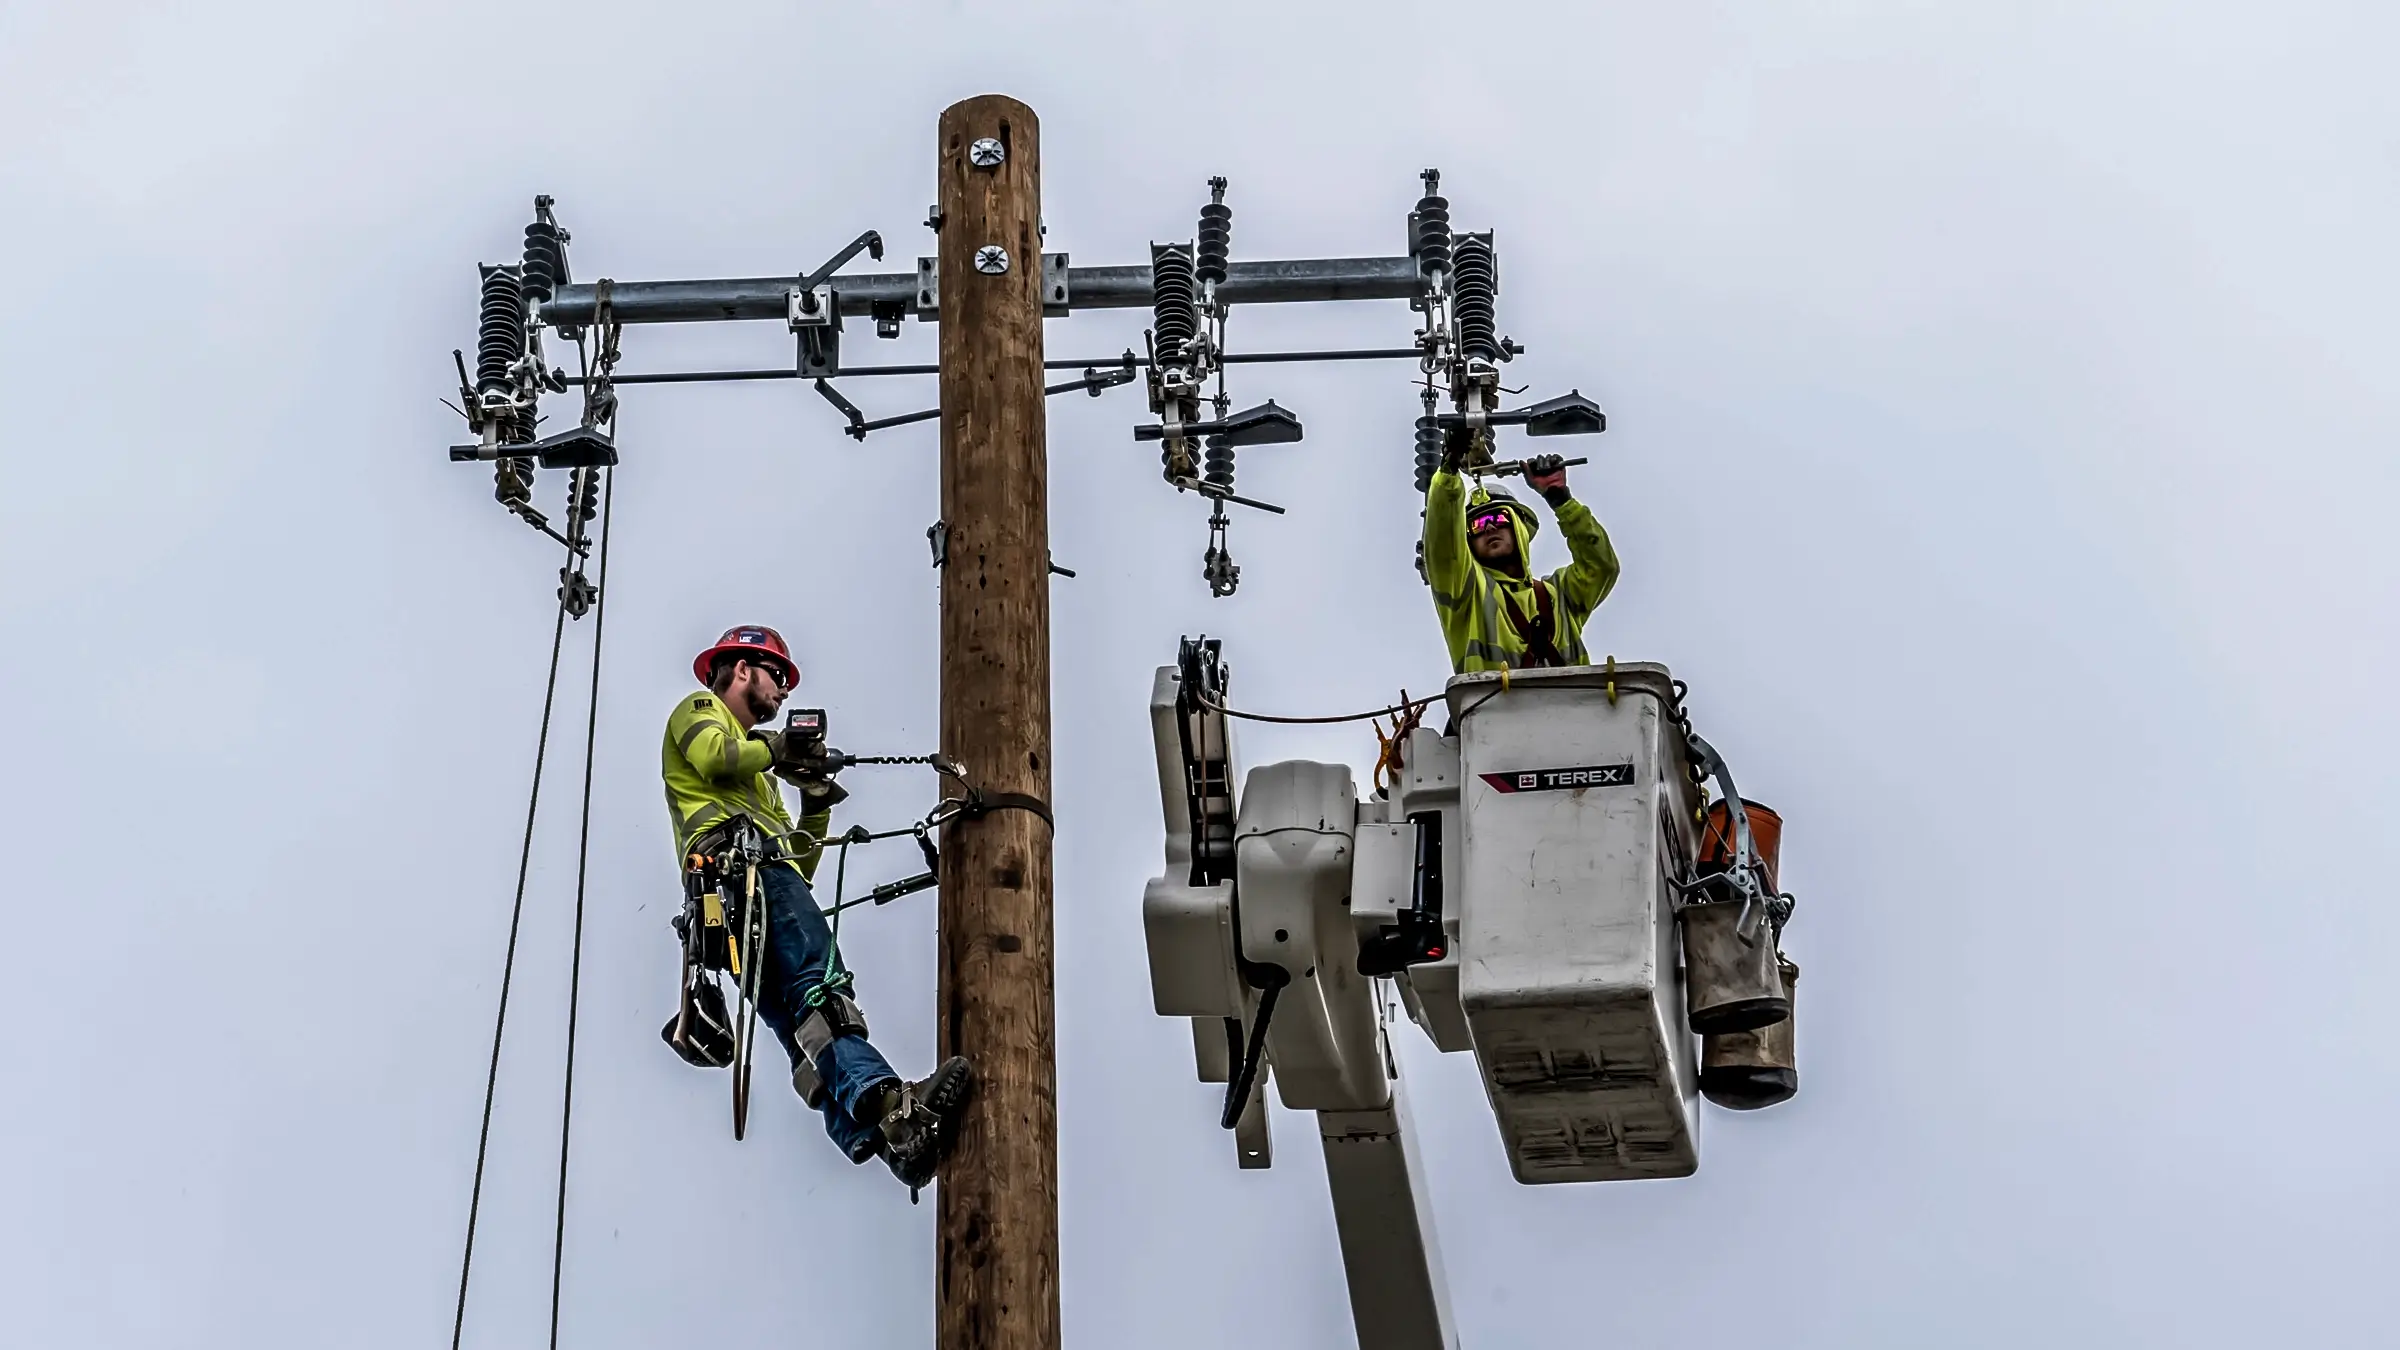 Michels Canada distribution line crews change out equipment on a power pole